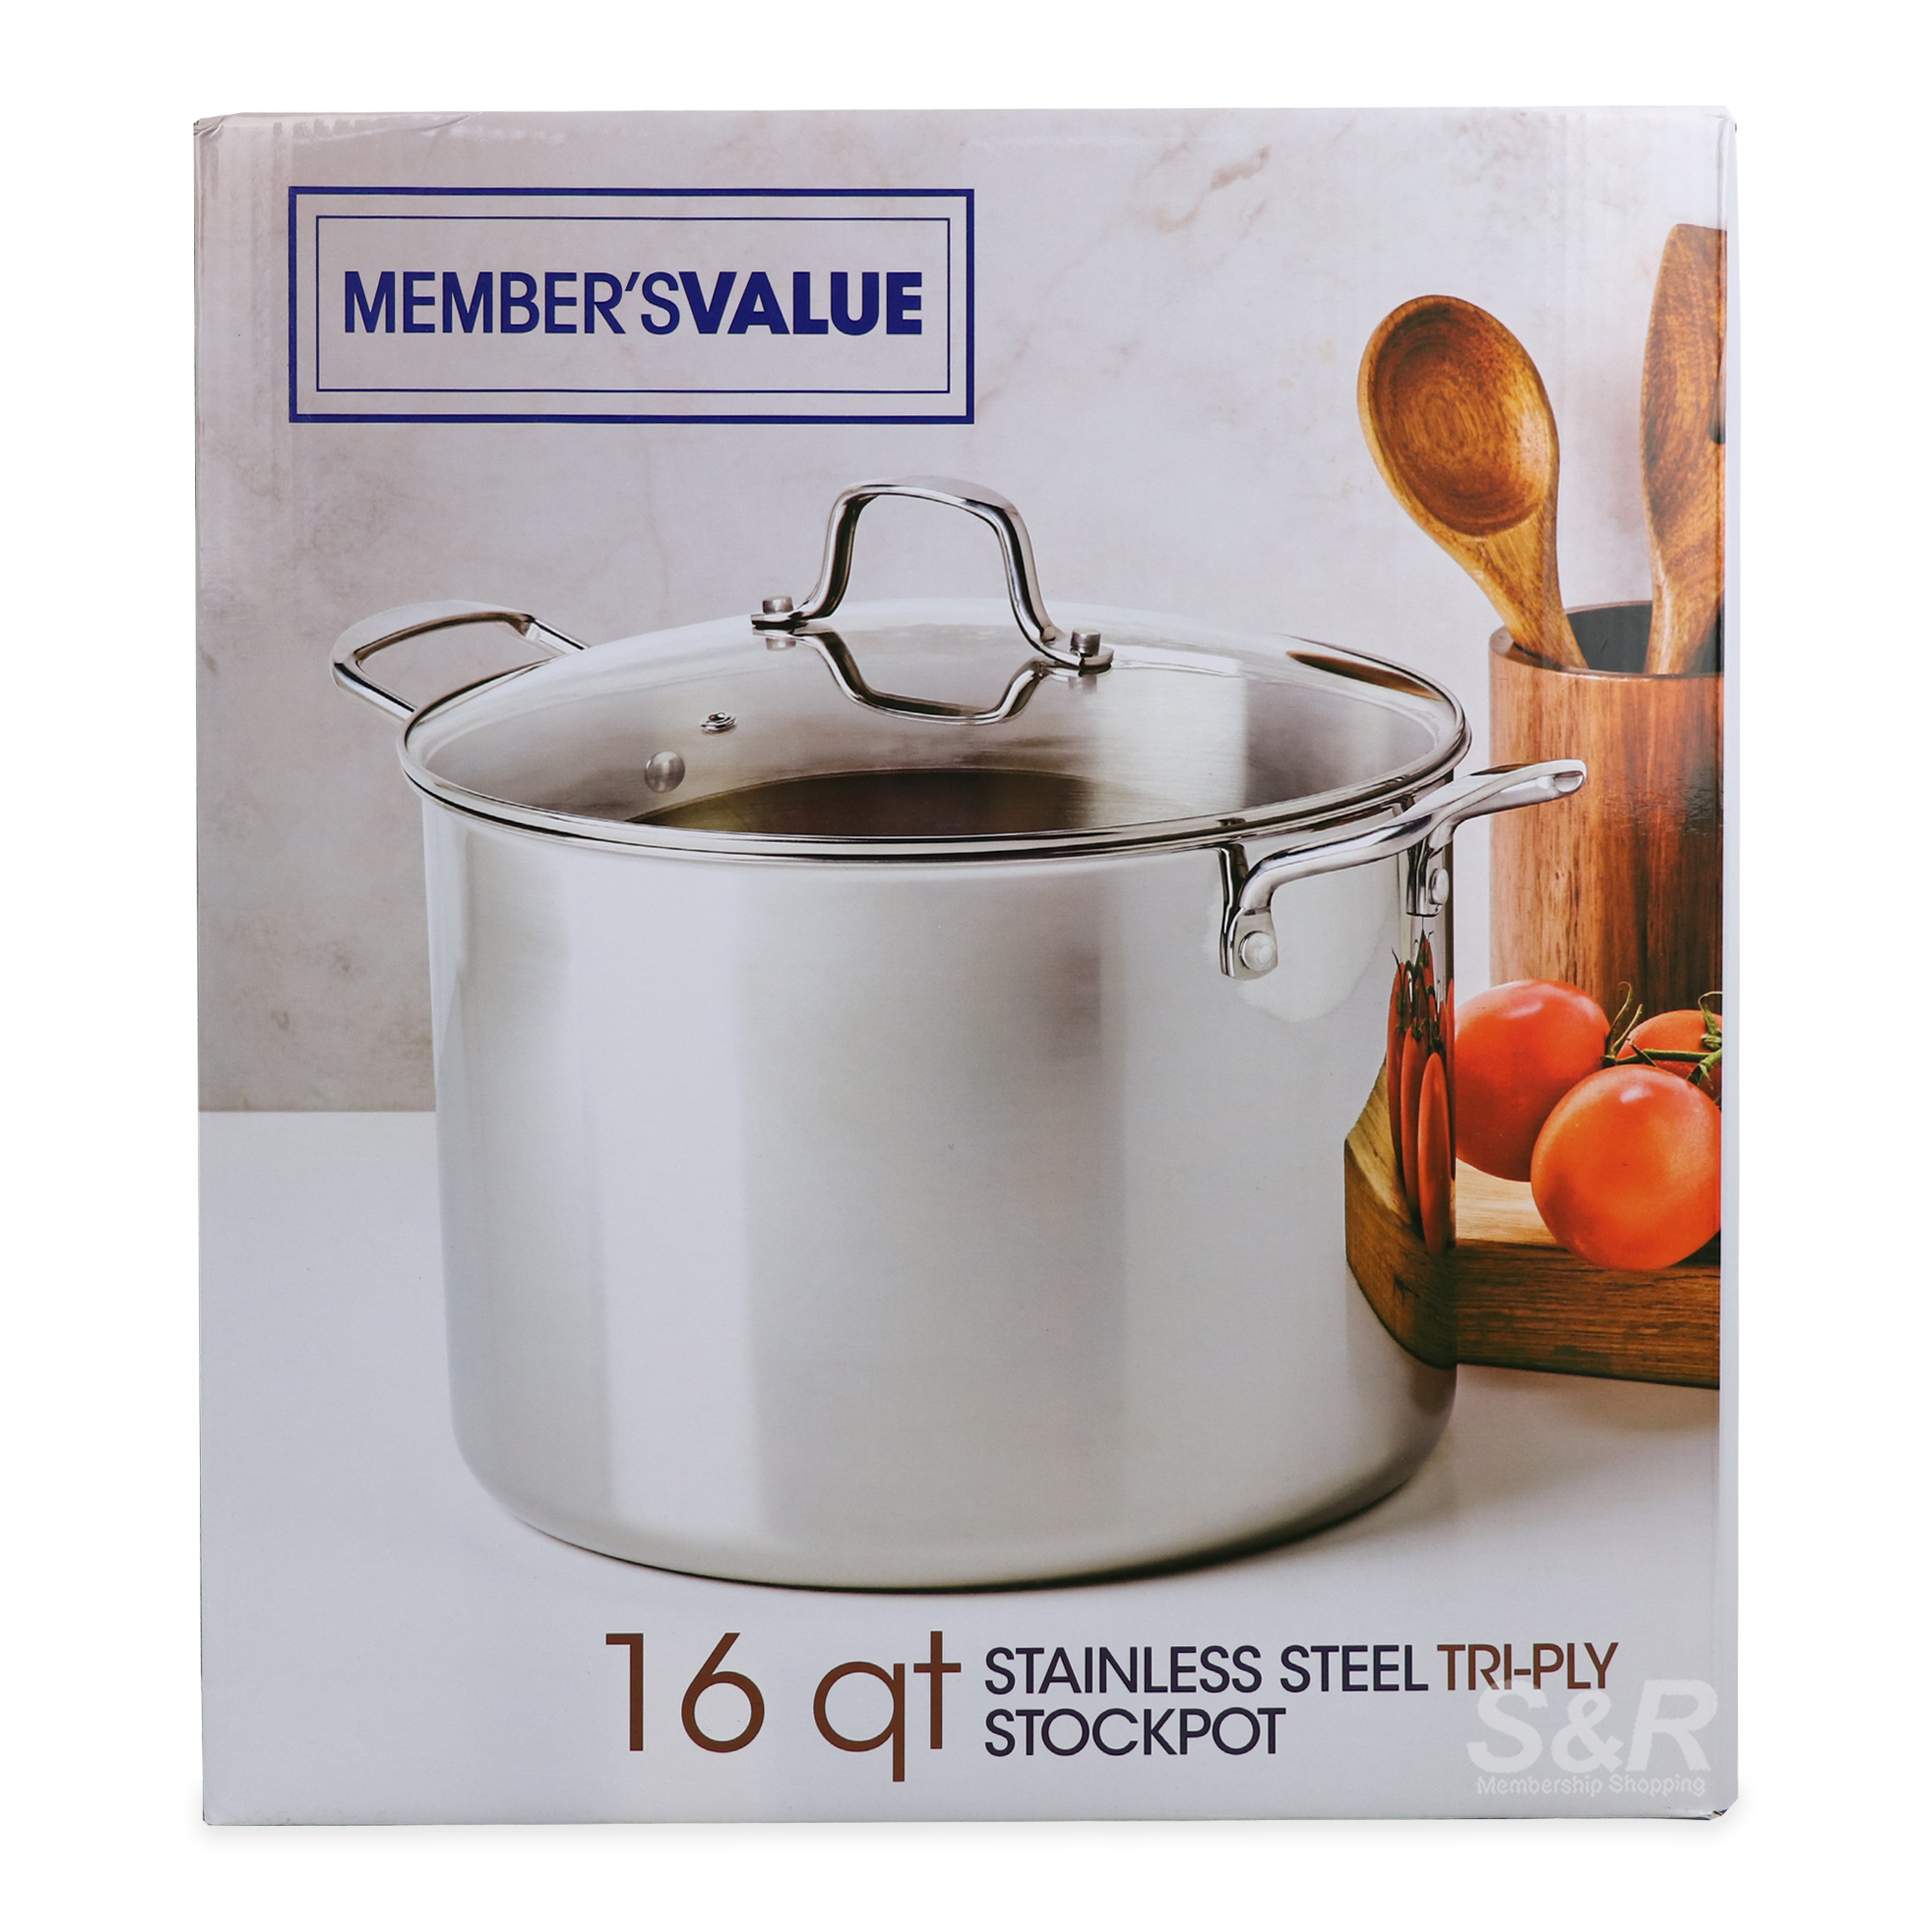 Member's Value Stainless Steel Tri-Ply Stockpot 16qt